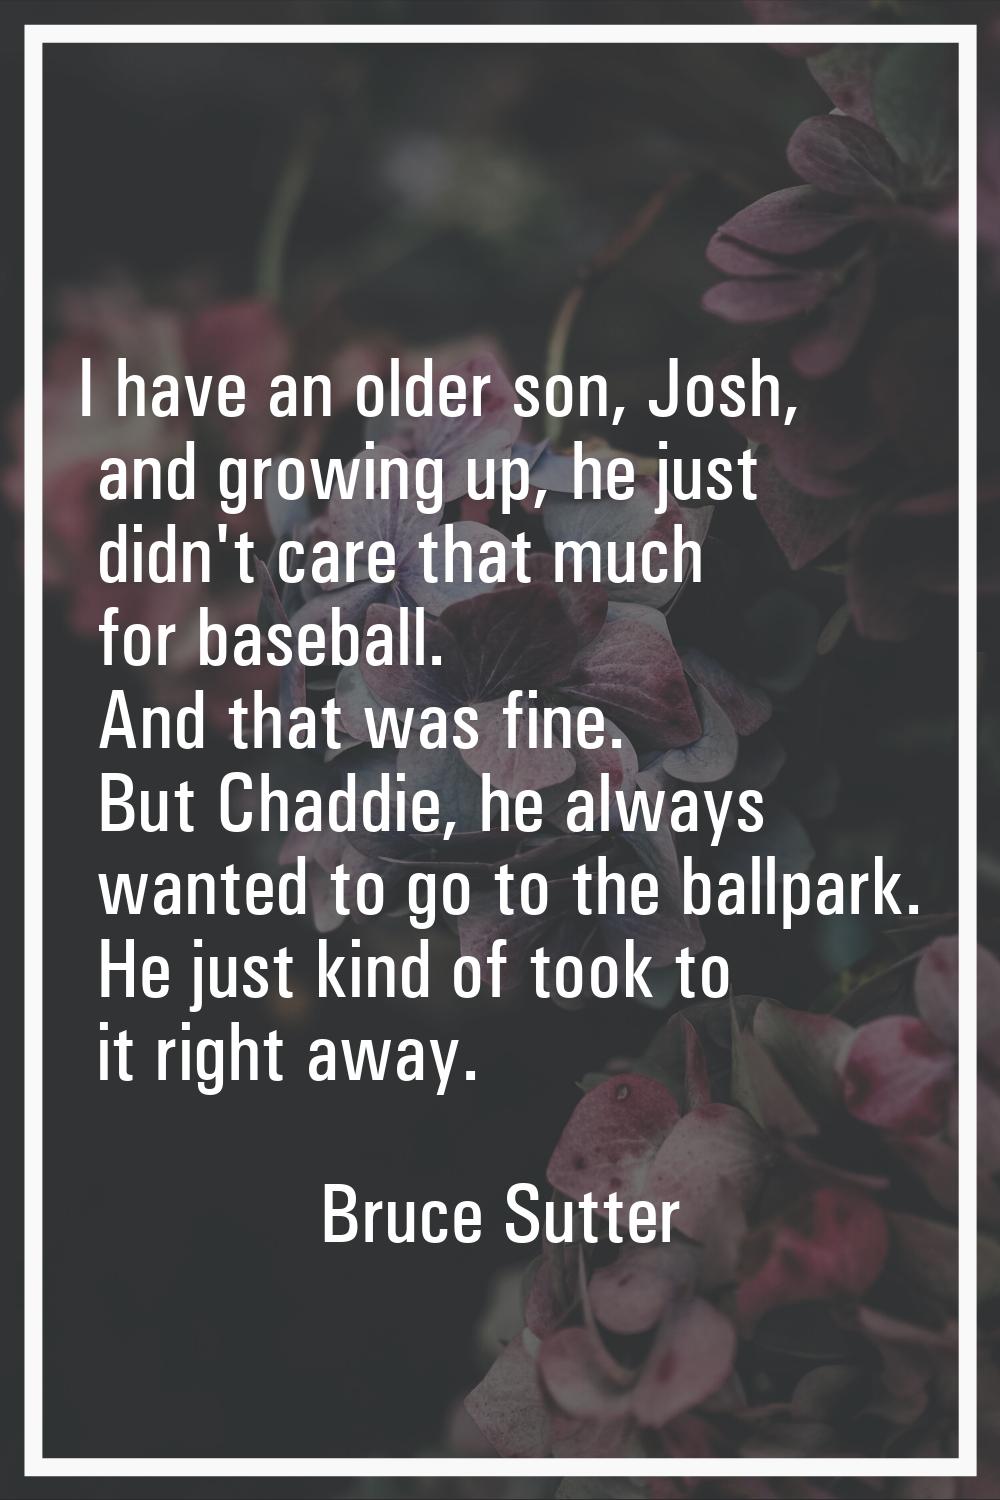 I have an older son, Josh, and growing up, he just didn't care that much for baseball. And that was